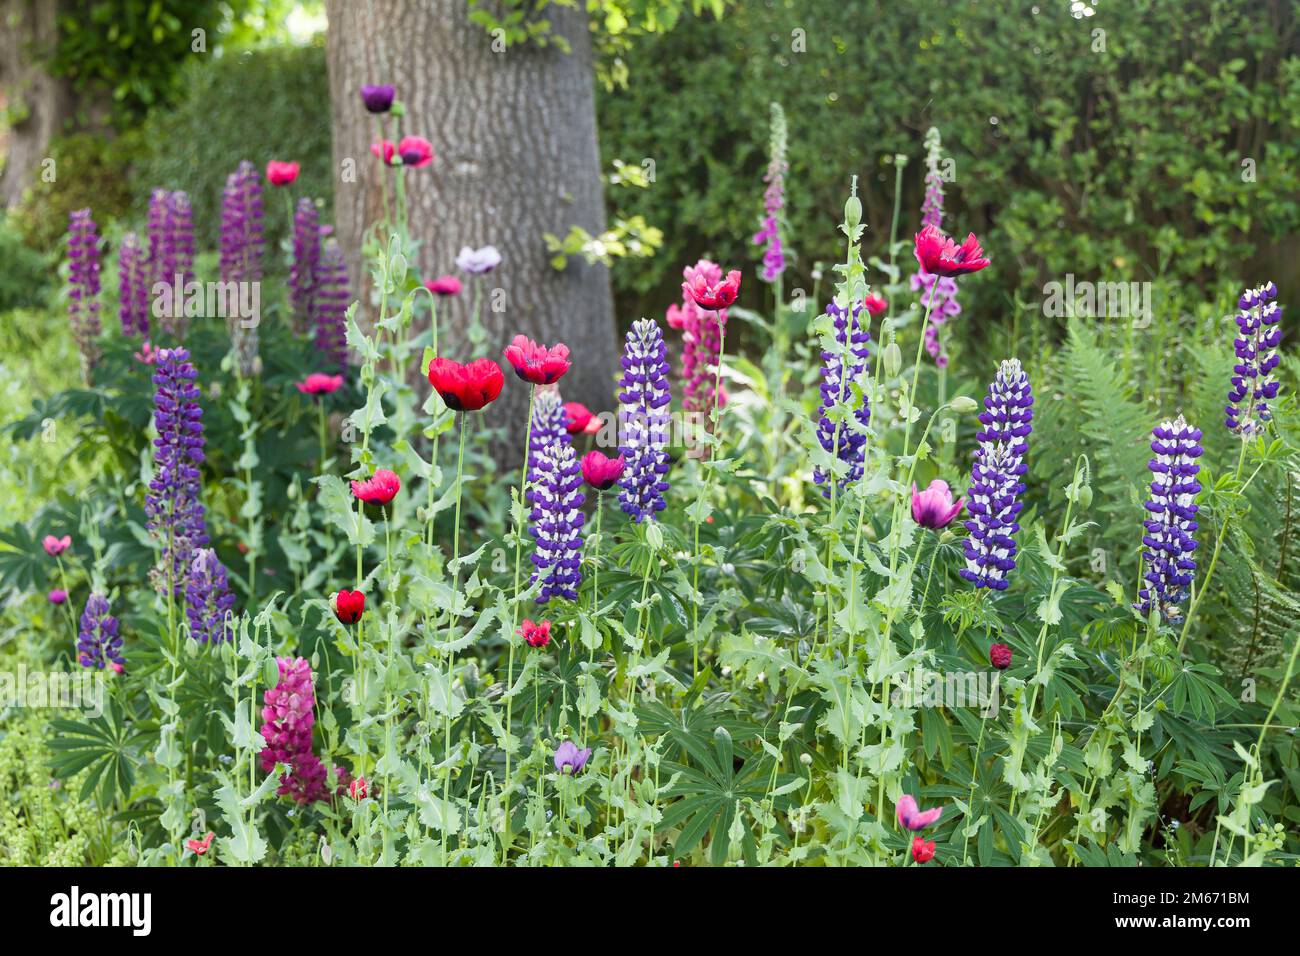 UK garden flowers in spring. Lupins and poppies growing in a UK garden flowerbed Stock Photo